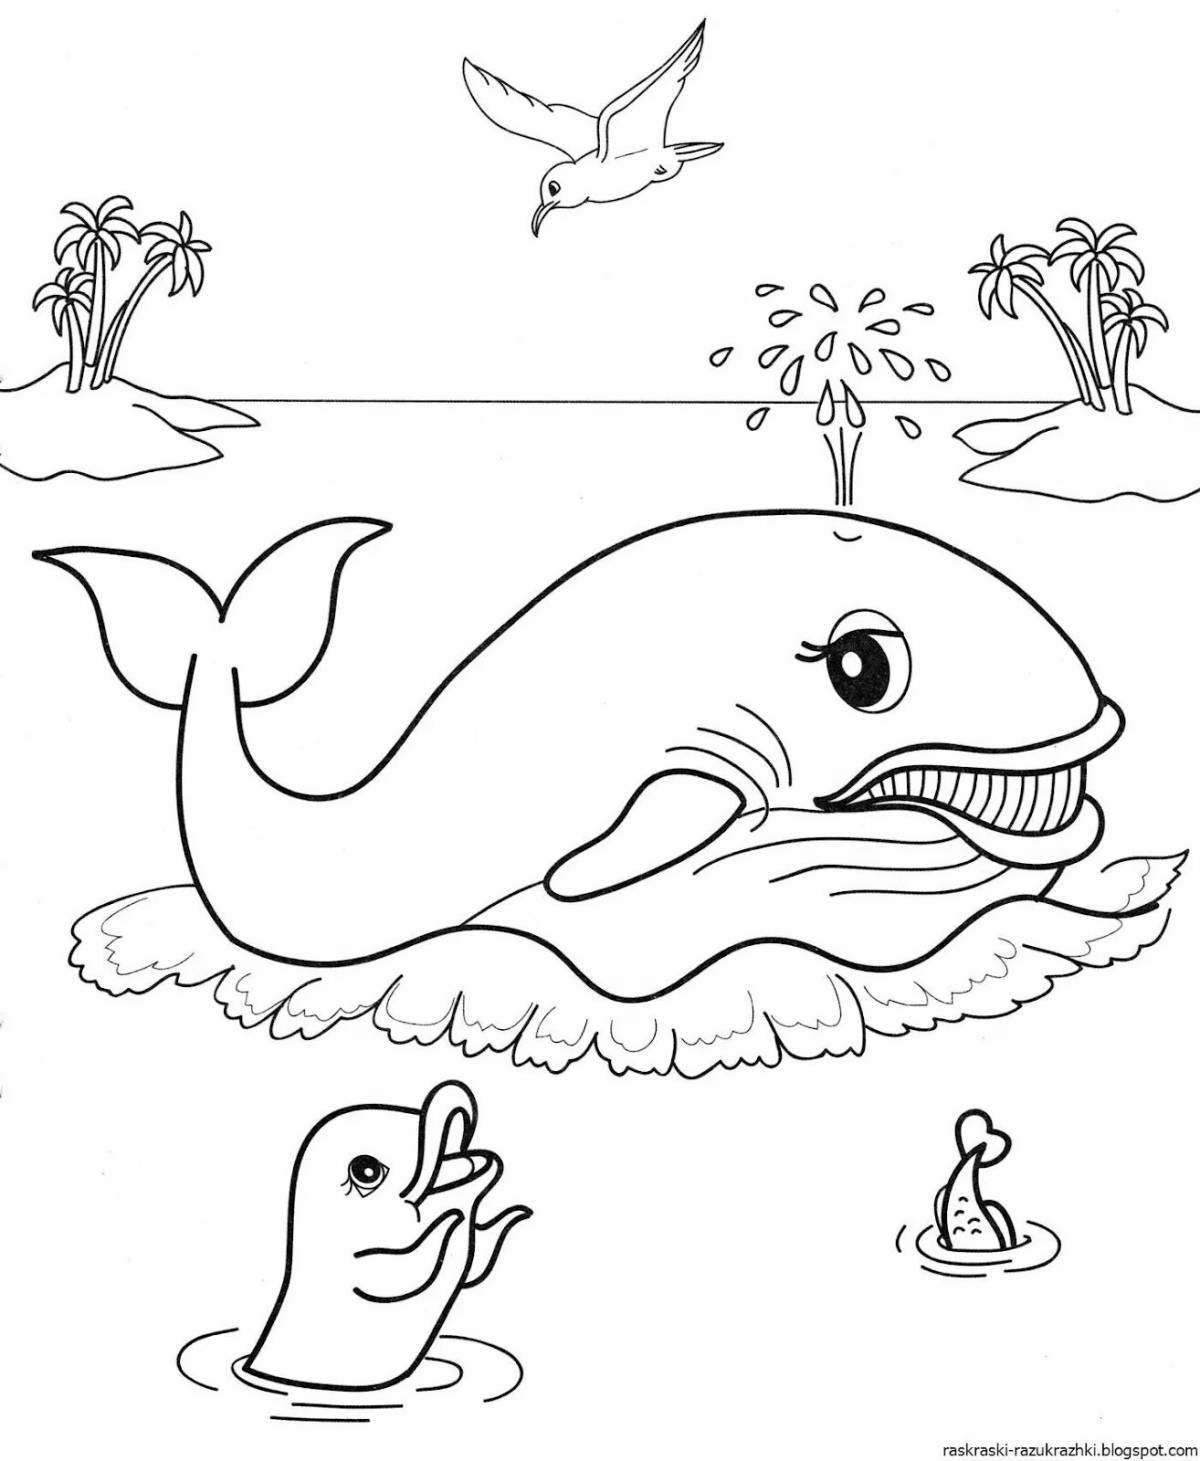 Vibrant whale coloring page for kids